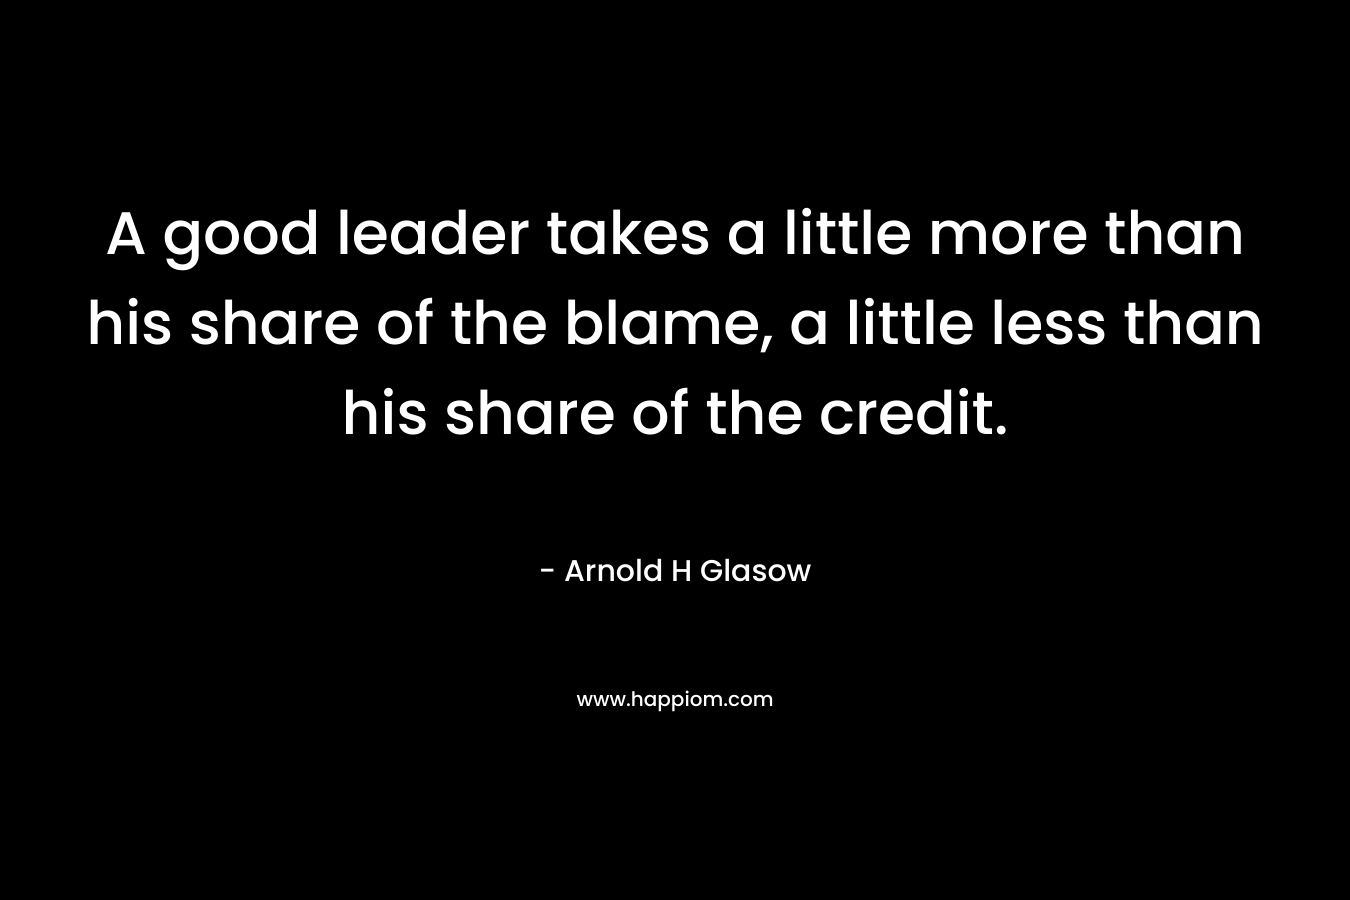 A good leader takes a little more than his share of the blame, a little less than his share of the credit. – Arnold H Glasow